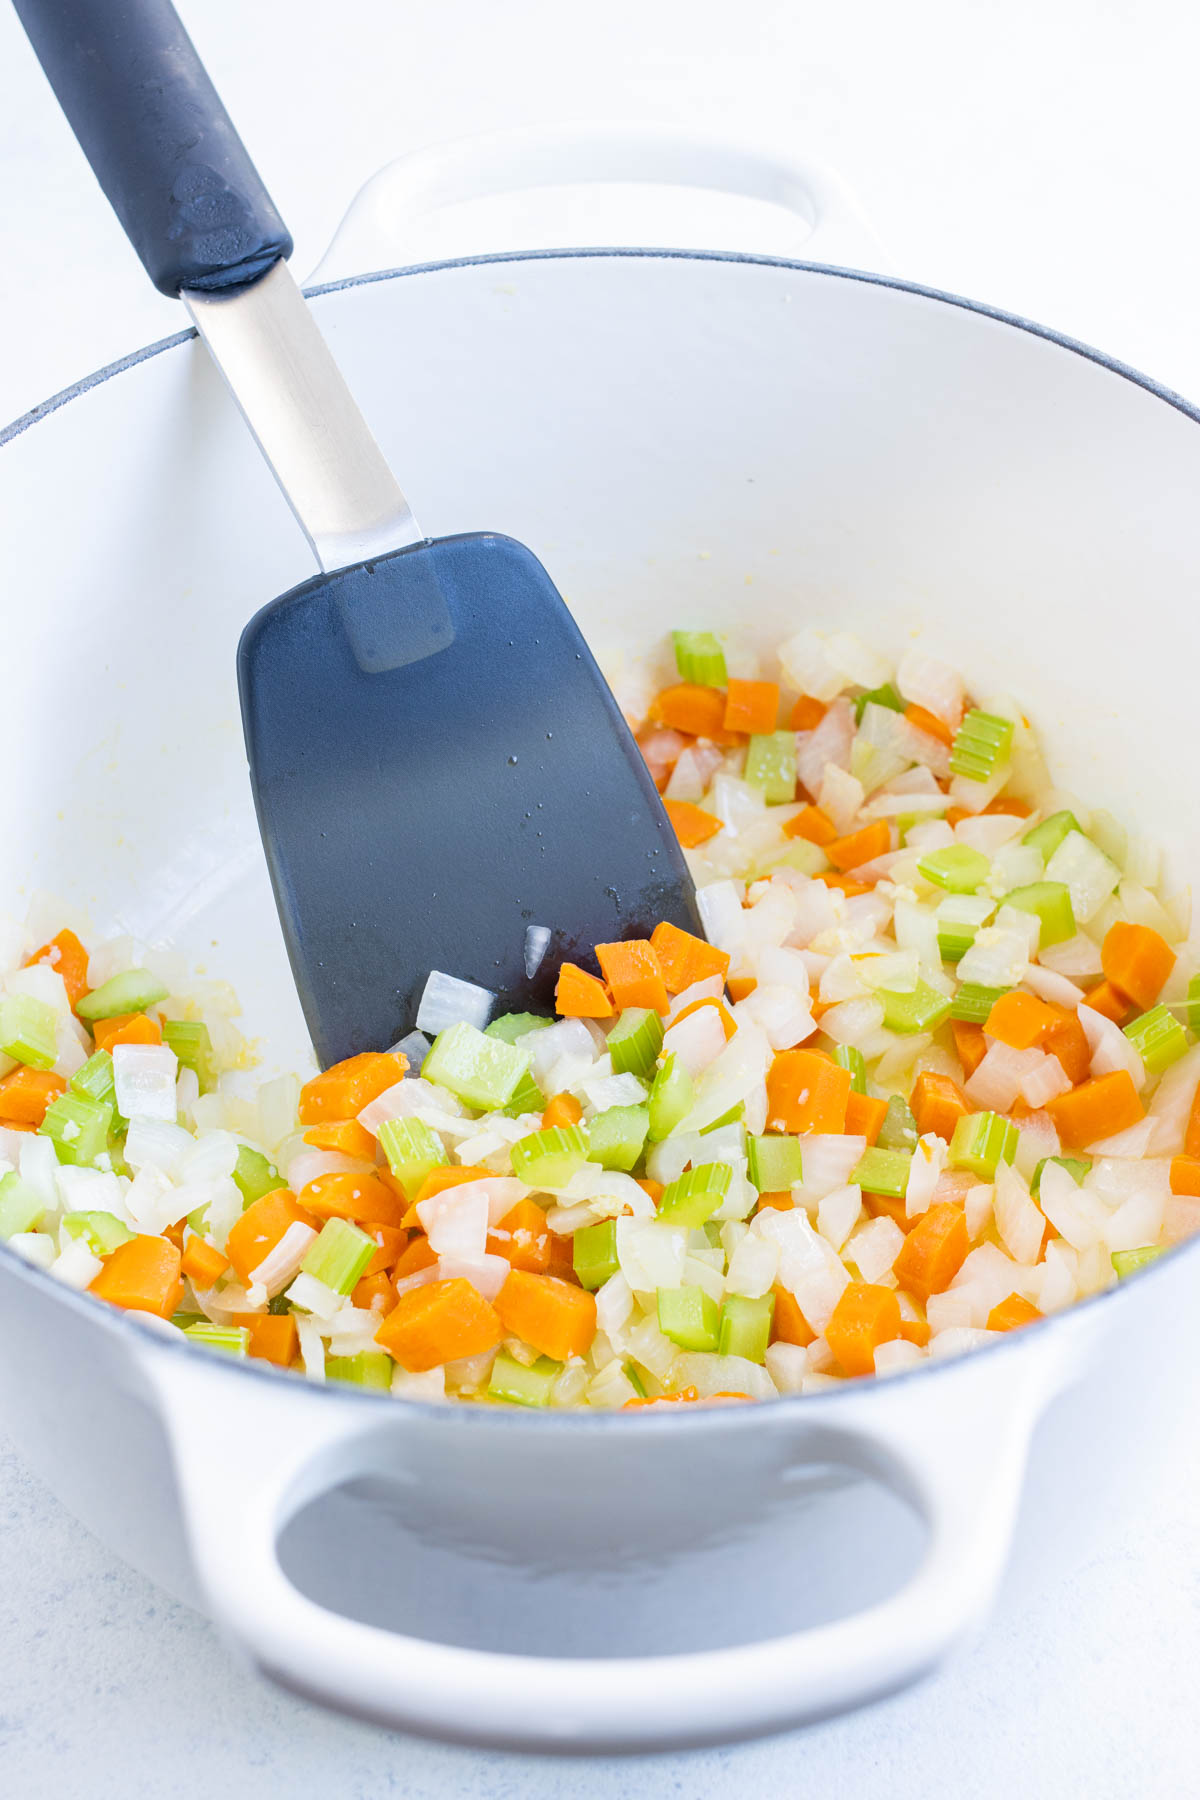 Carrots, onion, and celery are sauteed in a Dutch oven.